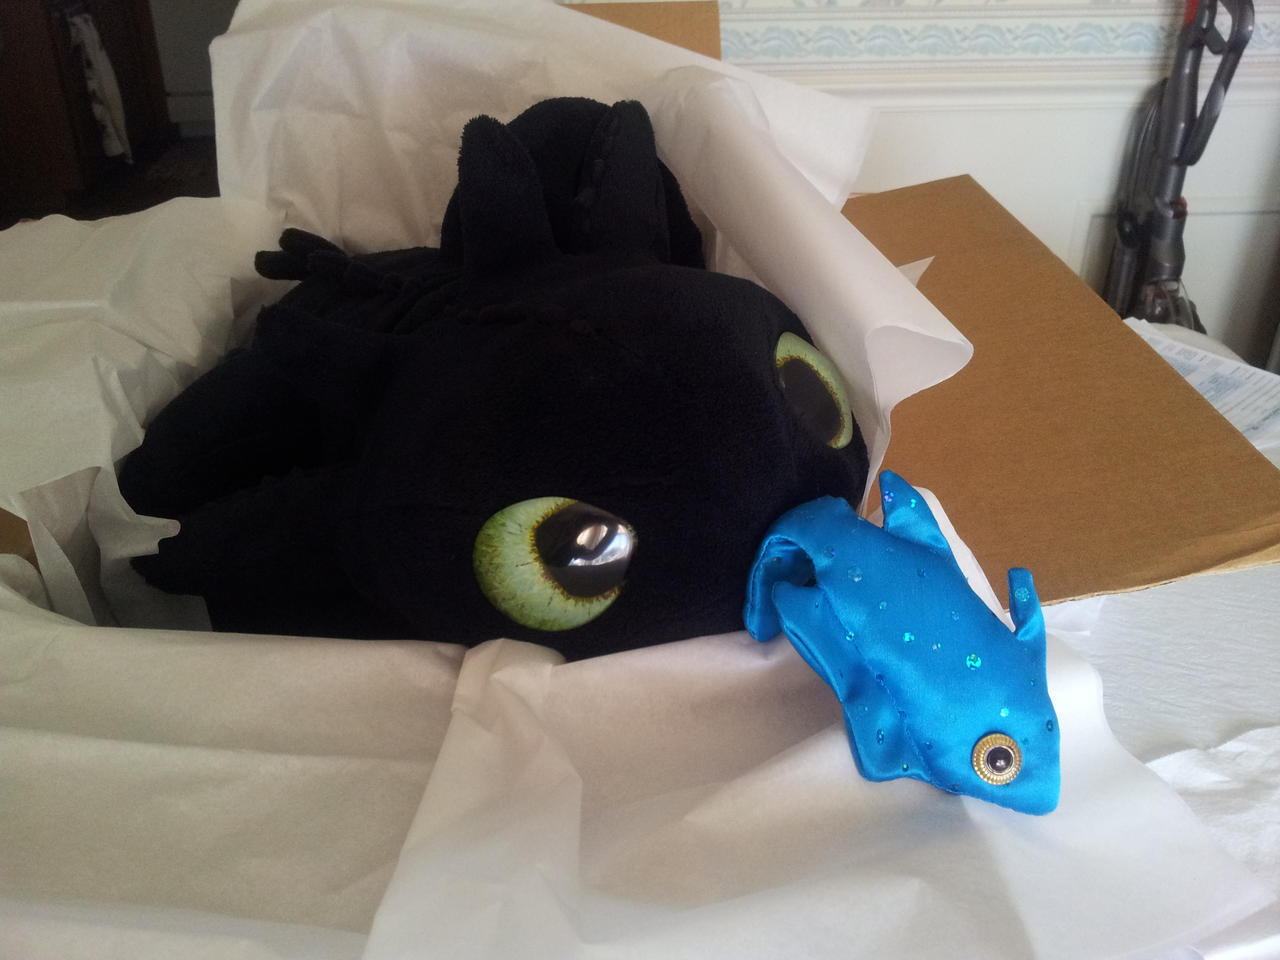 Toothless: Ready for adventure.